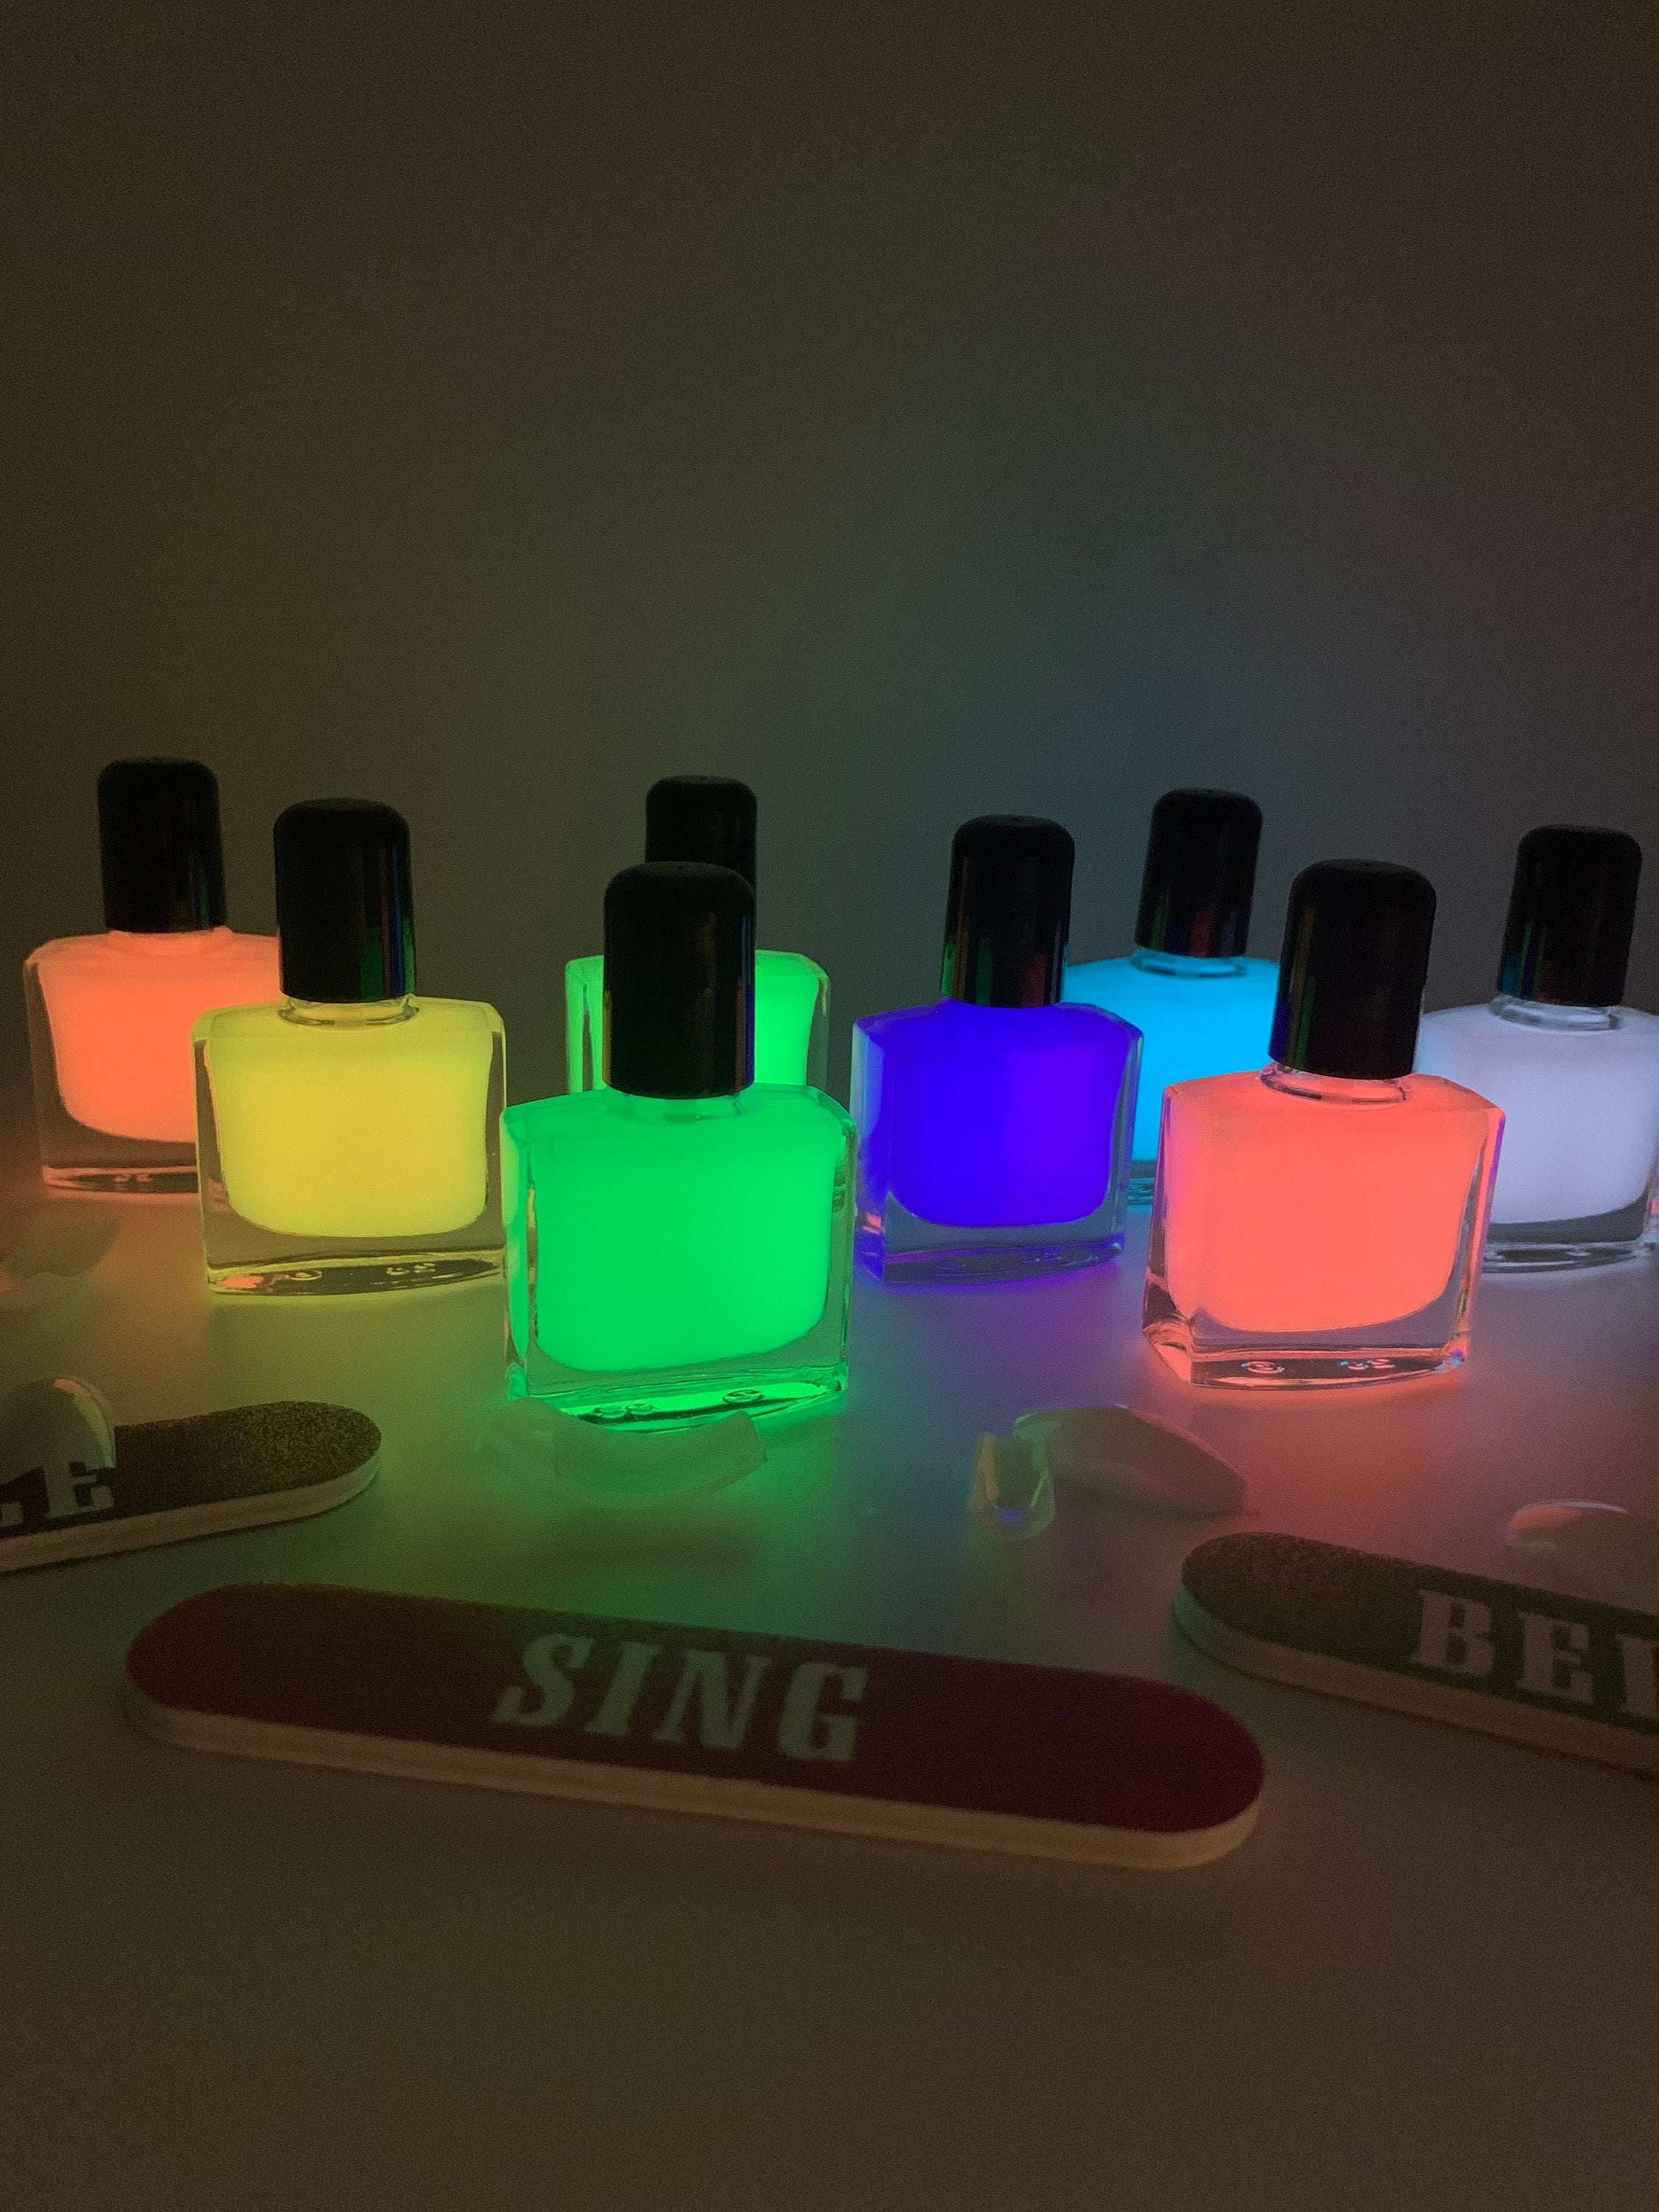 LETS GET LIT Glow In The Dark Nail Topper- 10 Toxin Free Nail Polish- Vegan  Friendly, Cruelty Free